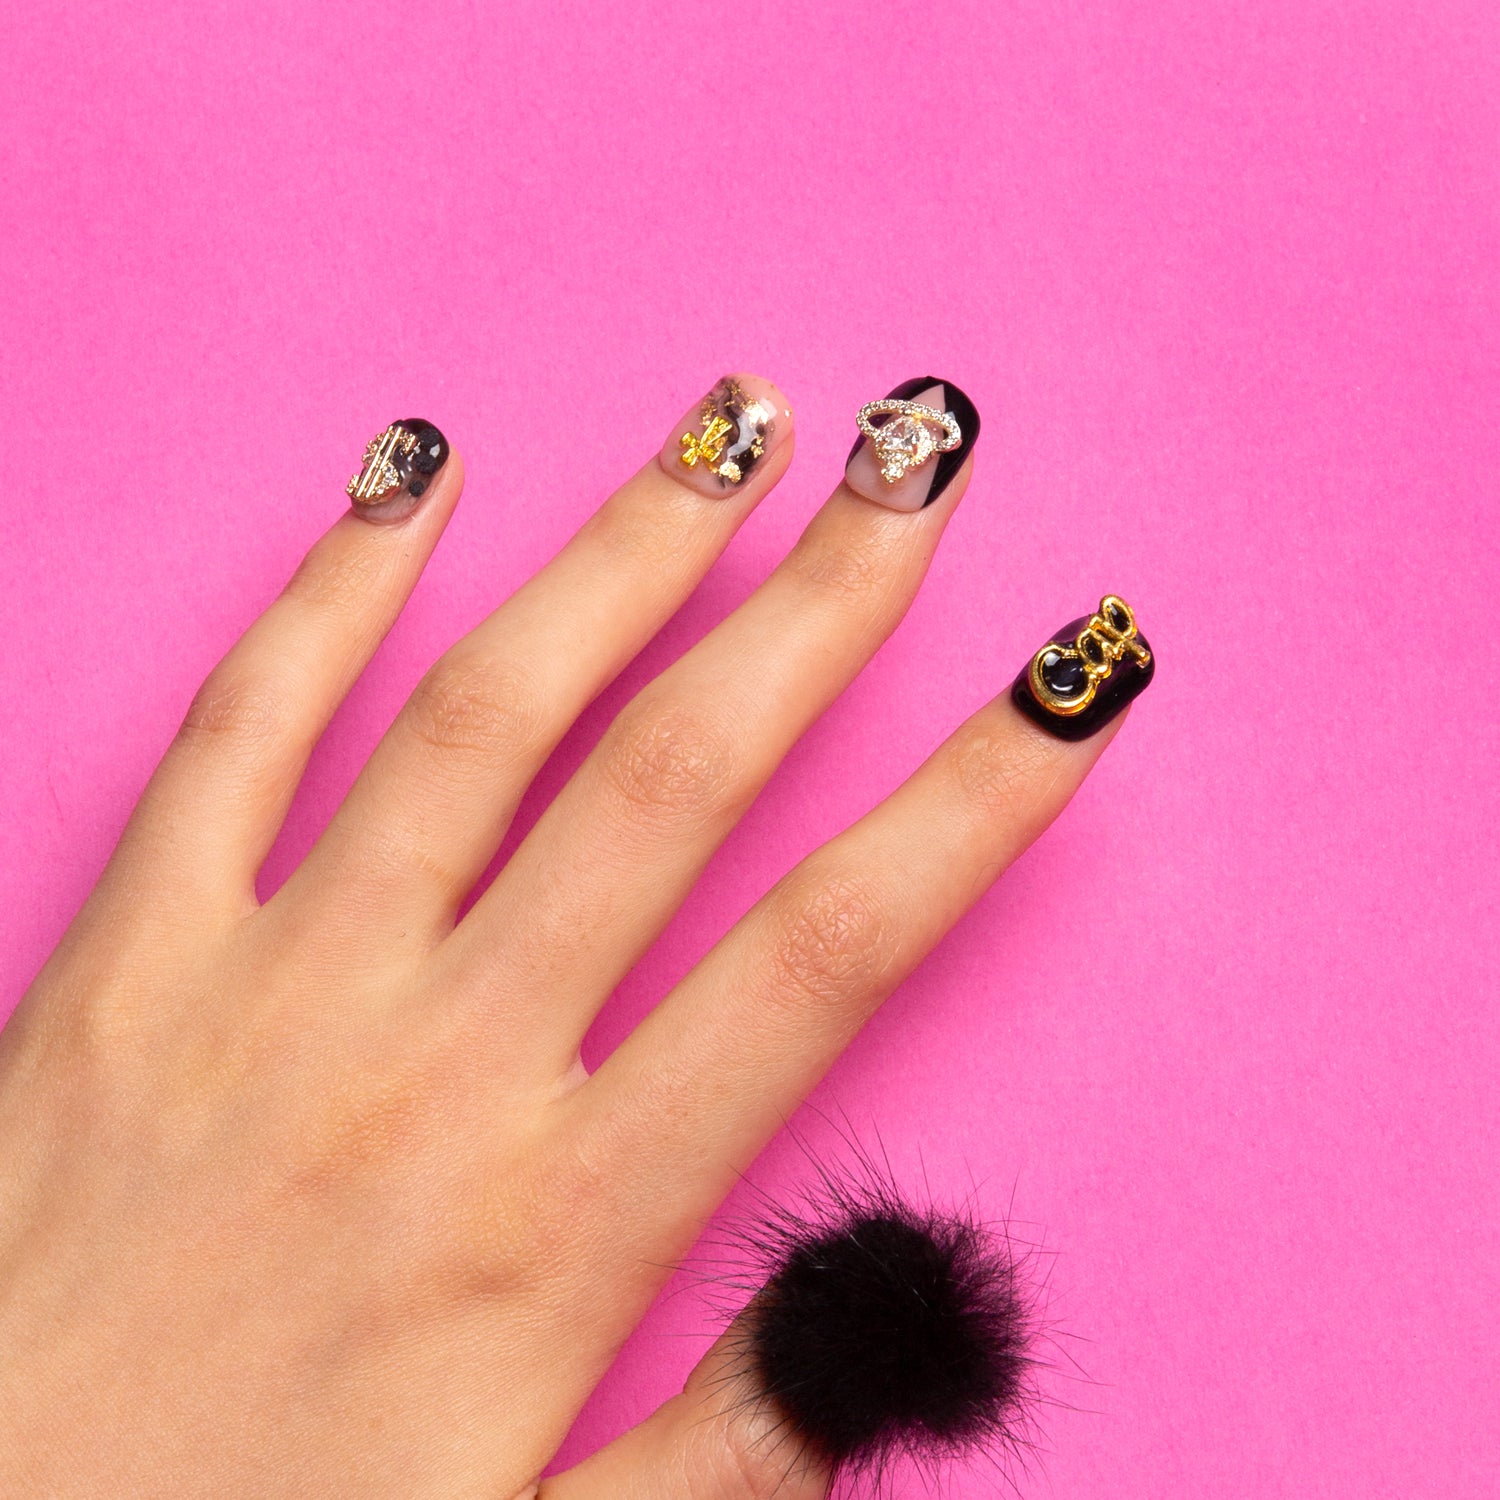 Capricorn-themed press-on nails with black and white design, golden decorations, and black fluffy ball against a pink background